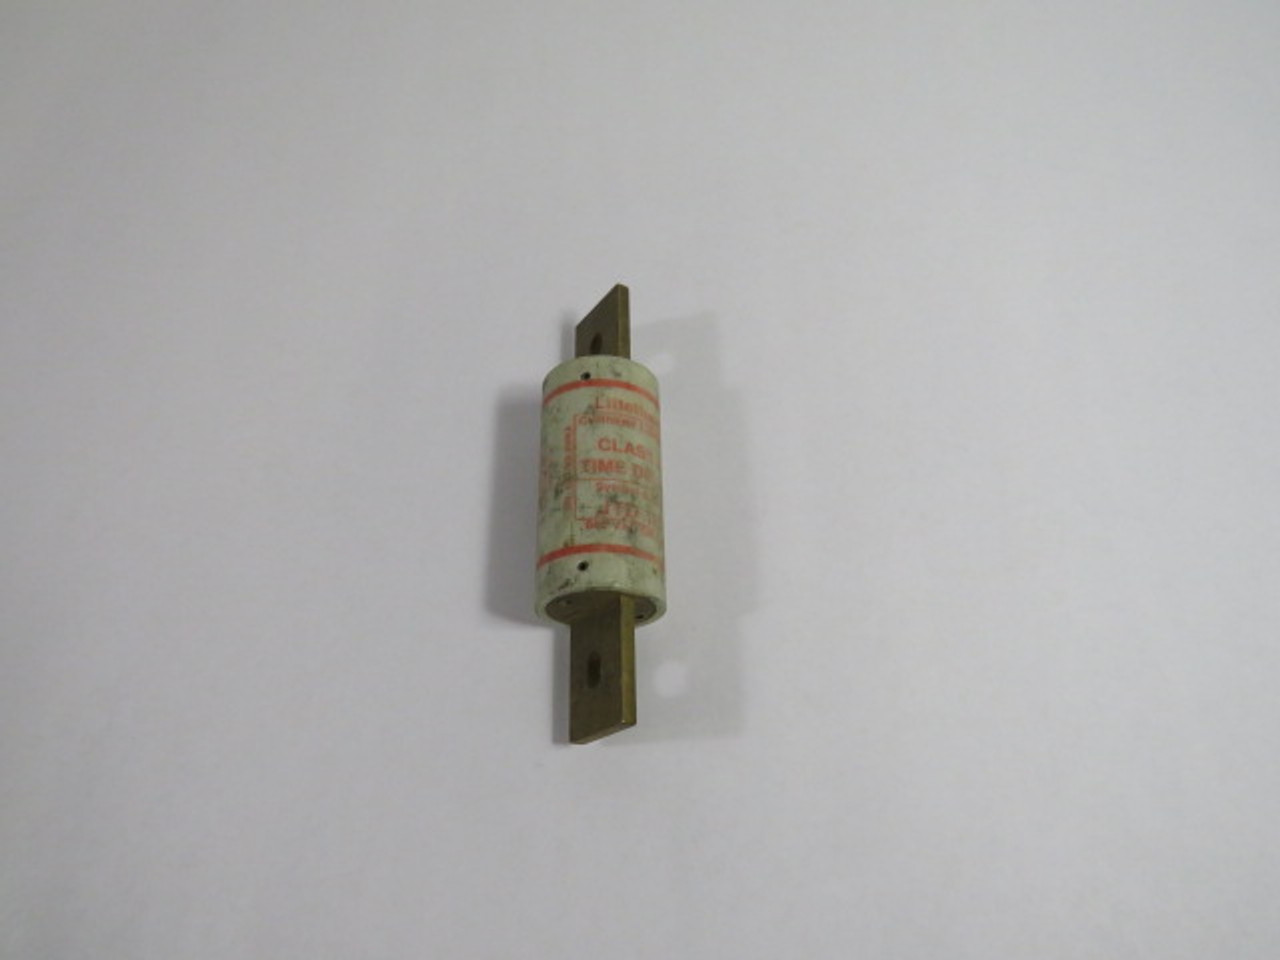 Littelfuse JTD-150 Current Limiting Fuse 150A 600V USED